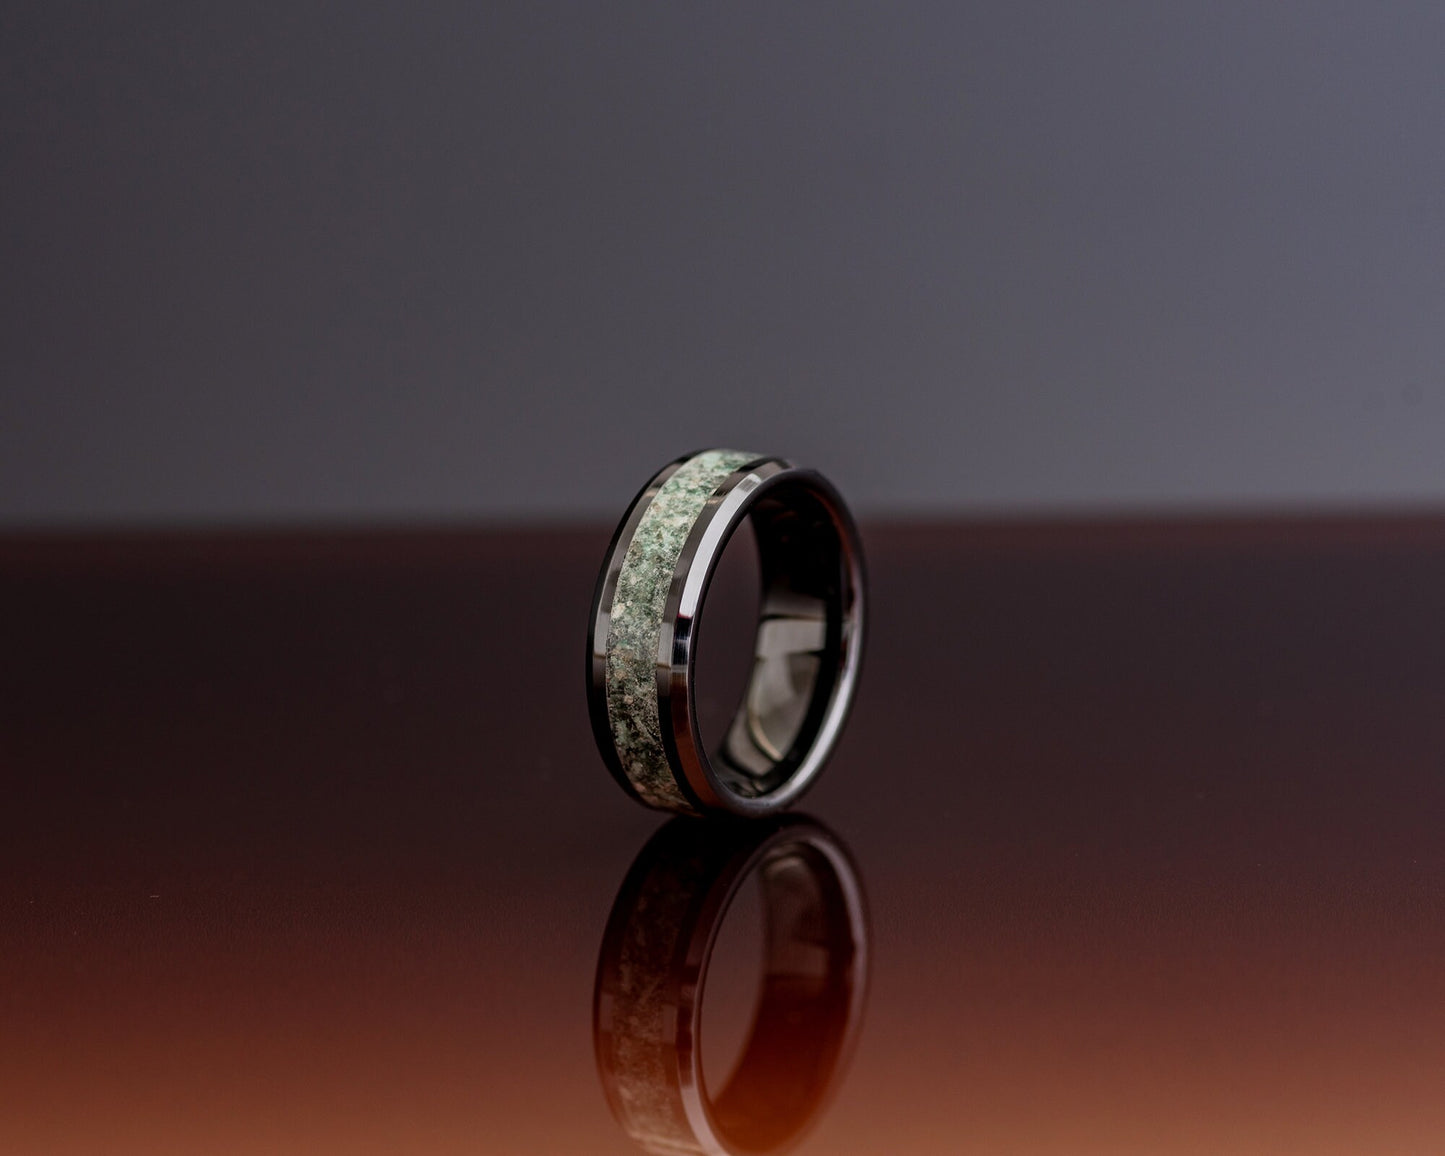 Black Ceramic Ring w/ Aventurine Stone Inlay Ring | Handcrafted Size 11 Ring